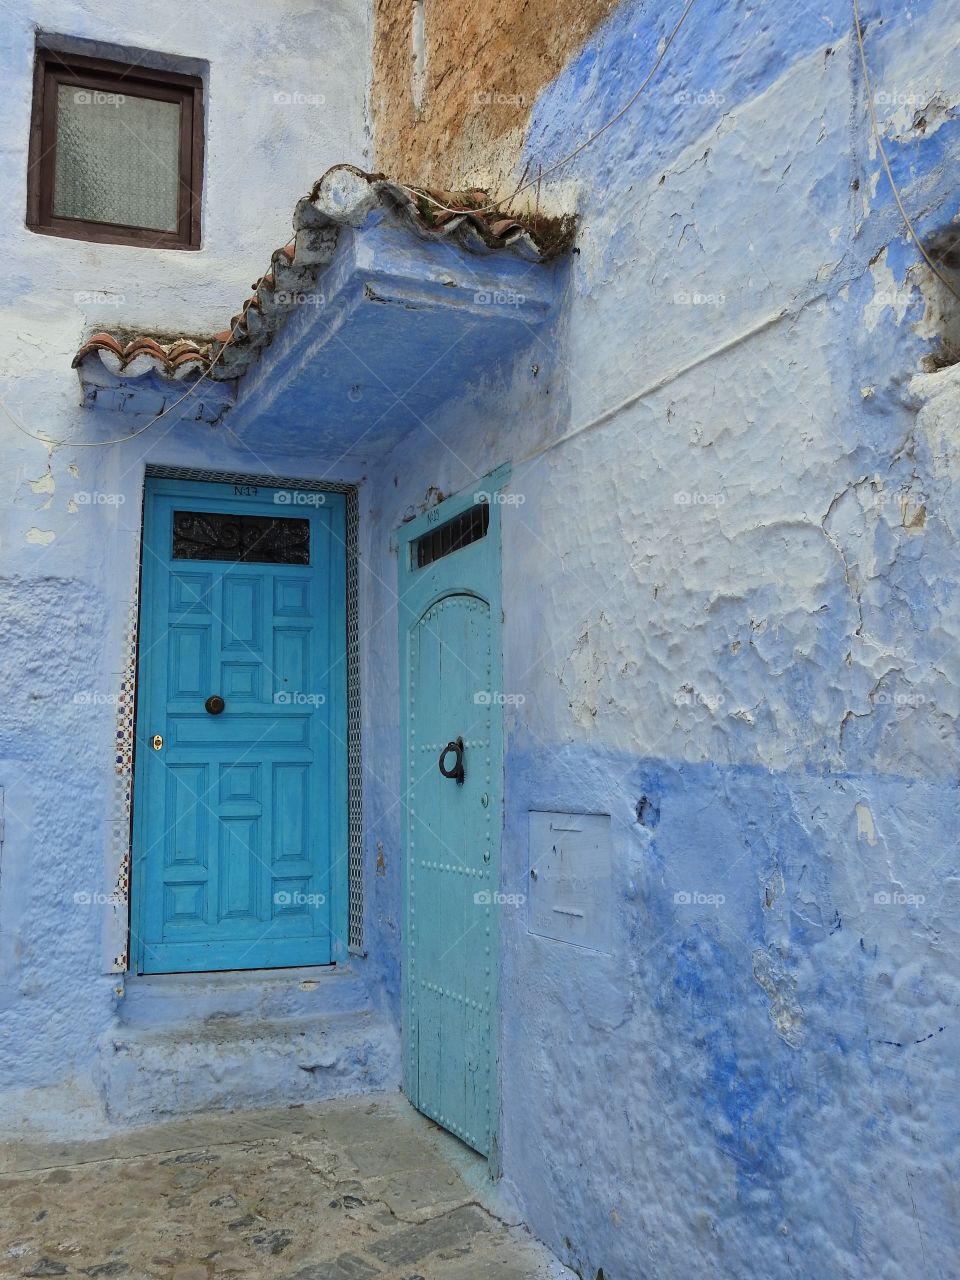 Chefchaouen blues in Morocco